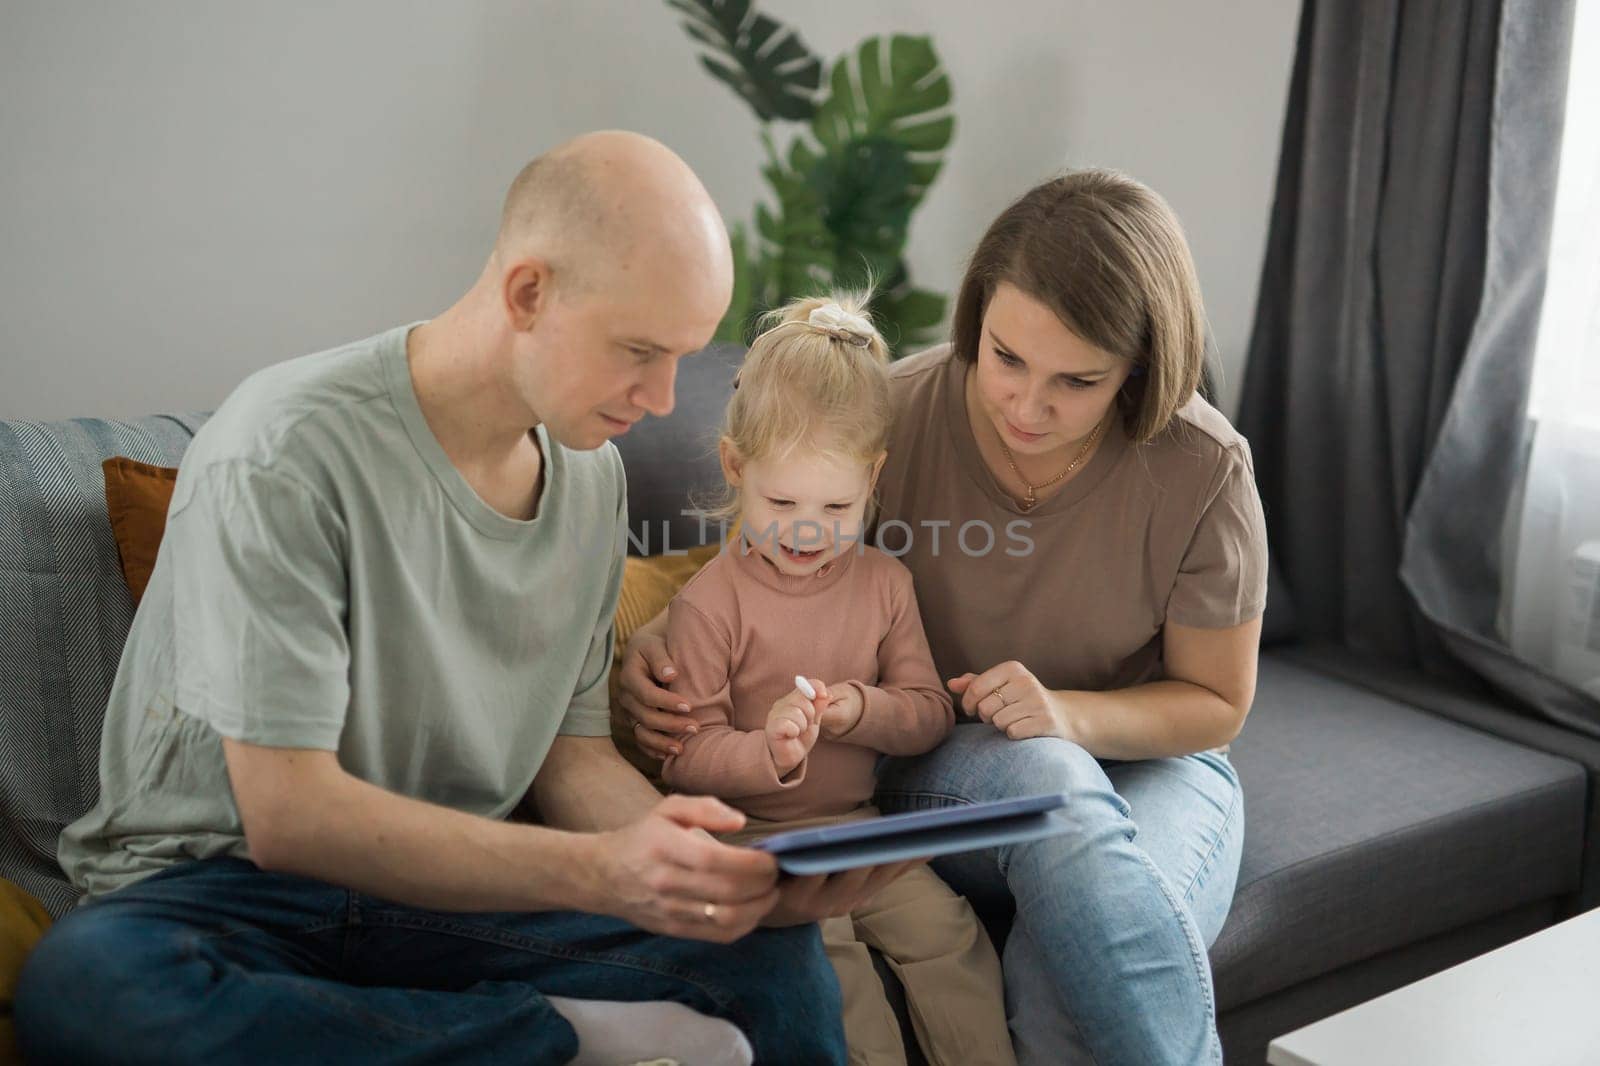 Deaf child girl with cochlear implant studying to hear sounds and have fun with mother and father - recovery after cochlear Implant surgery and rehabilitation concept by Satura86